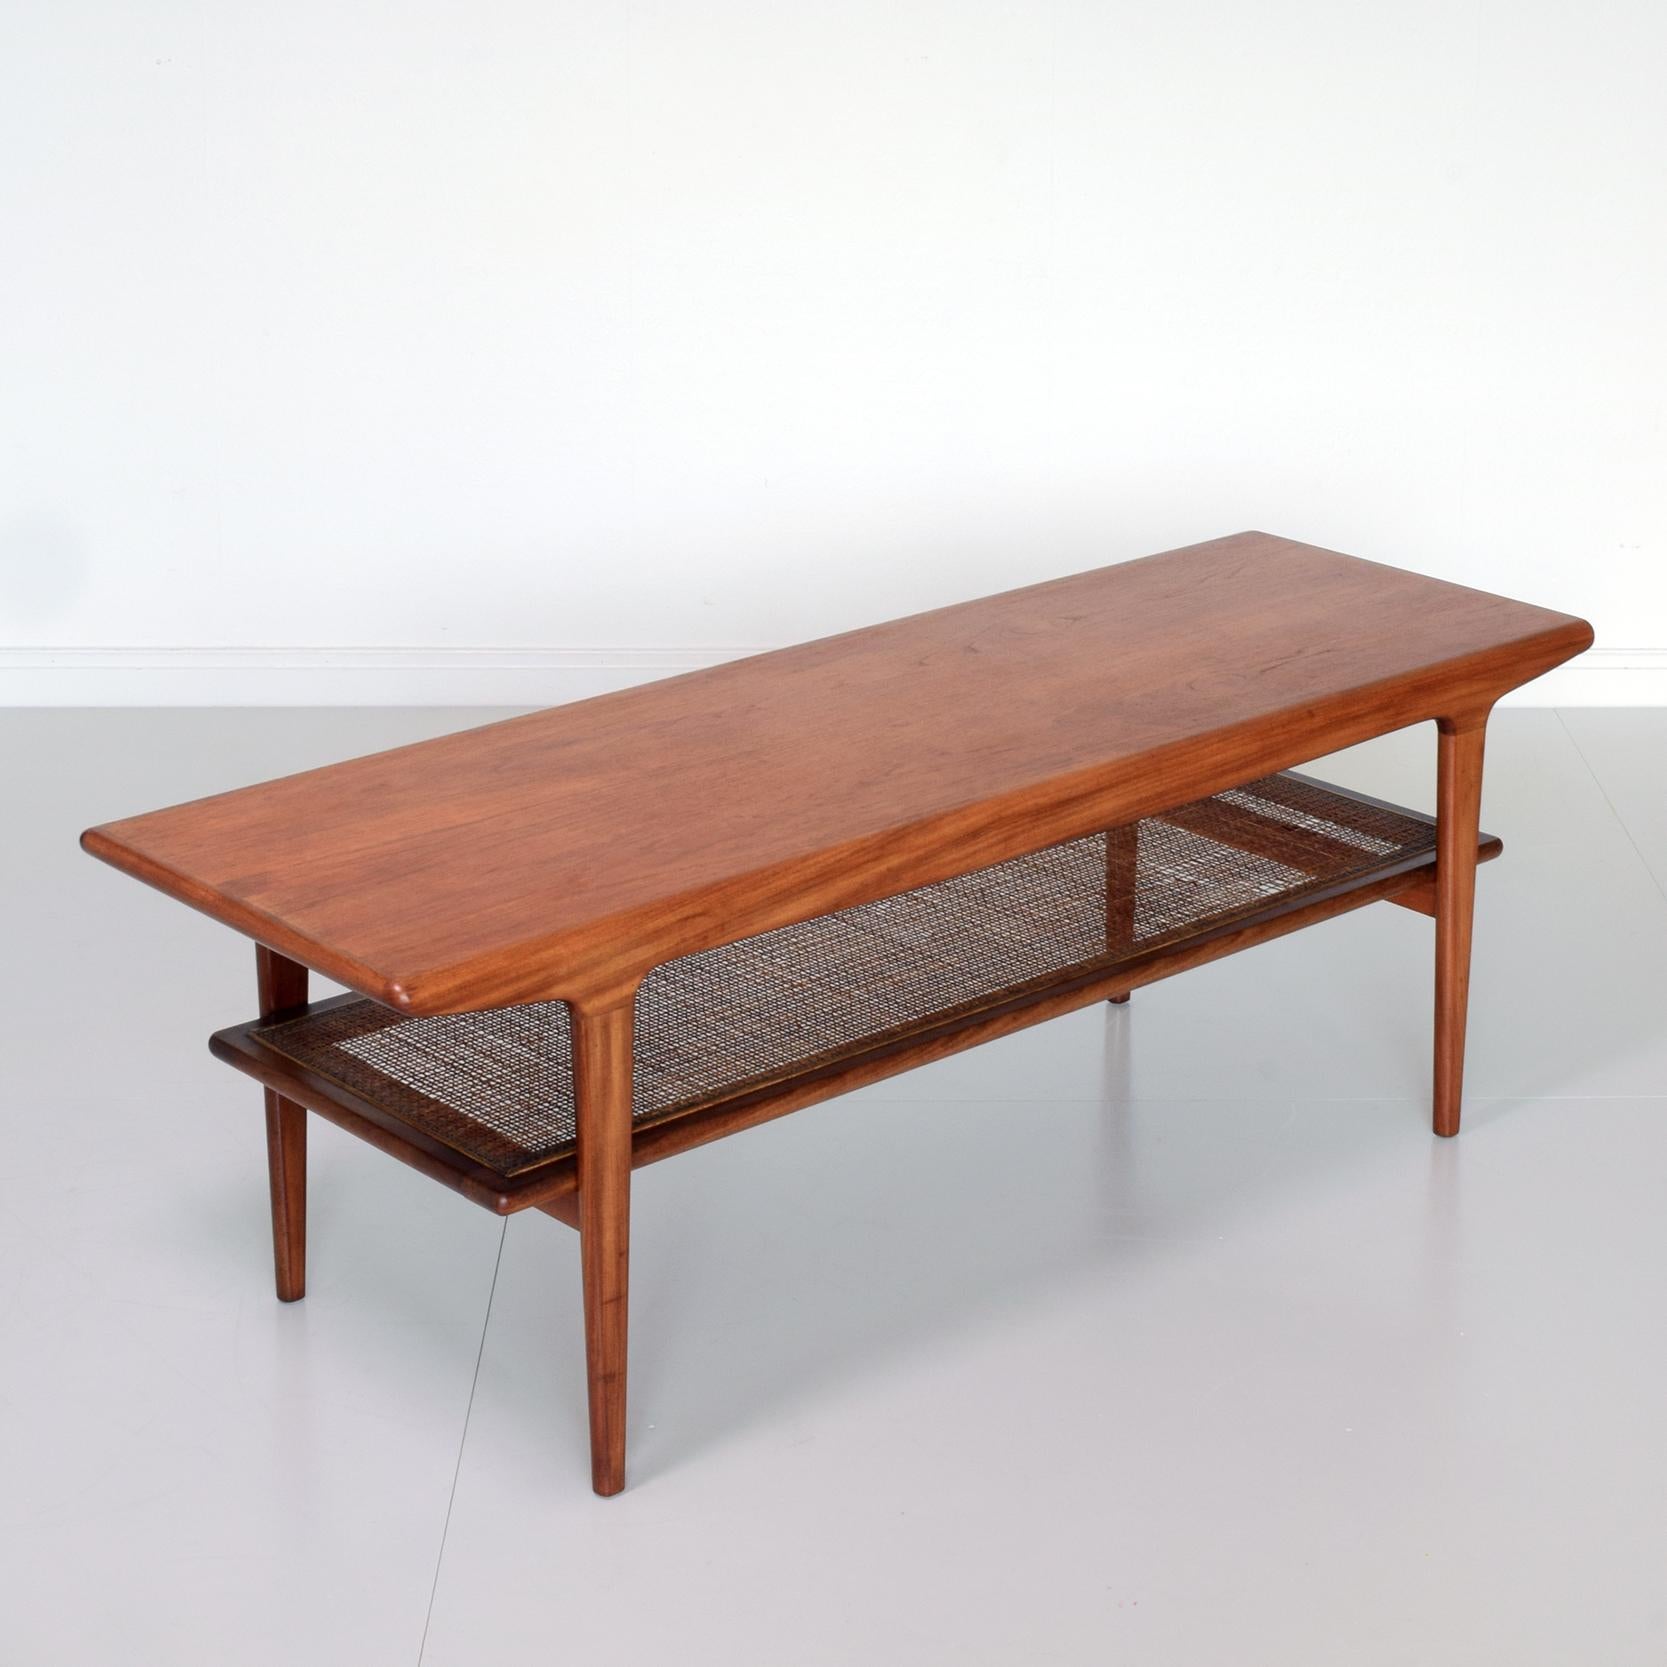 John Herbert (designer)
A. Younger Ltd, UK (manufacturer)

'Fonseca' low table, circa 1958.
Beautiful mid-century two-tier coffee table. Teak with cane/rattan shelf.

Condition: vey good condition. Teak top and frame has been lightly re-waxed.